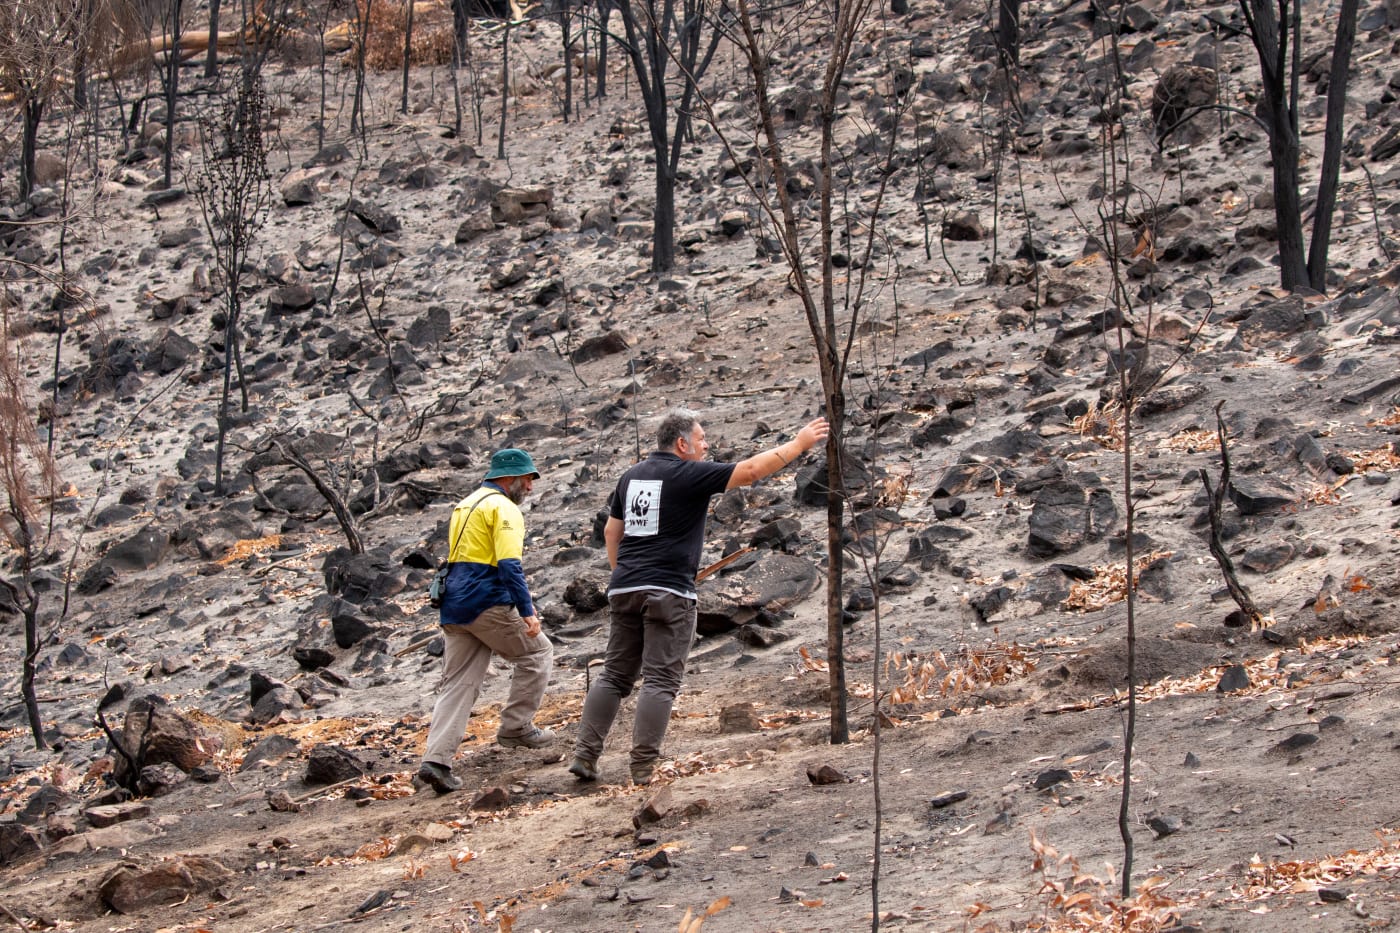 Mike Barth from Natural Resources Kangaroo Island and Darren Grover from WWF-Australia survey the fire damage to glossy black-cockatoo habitat in Lathami Conservation Park